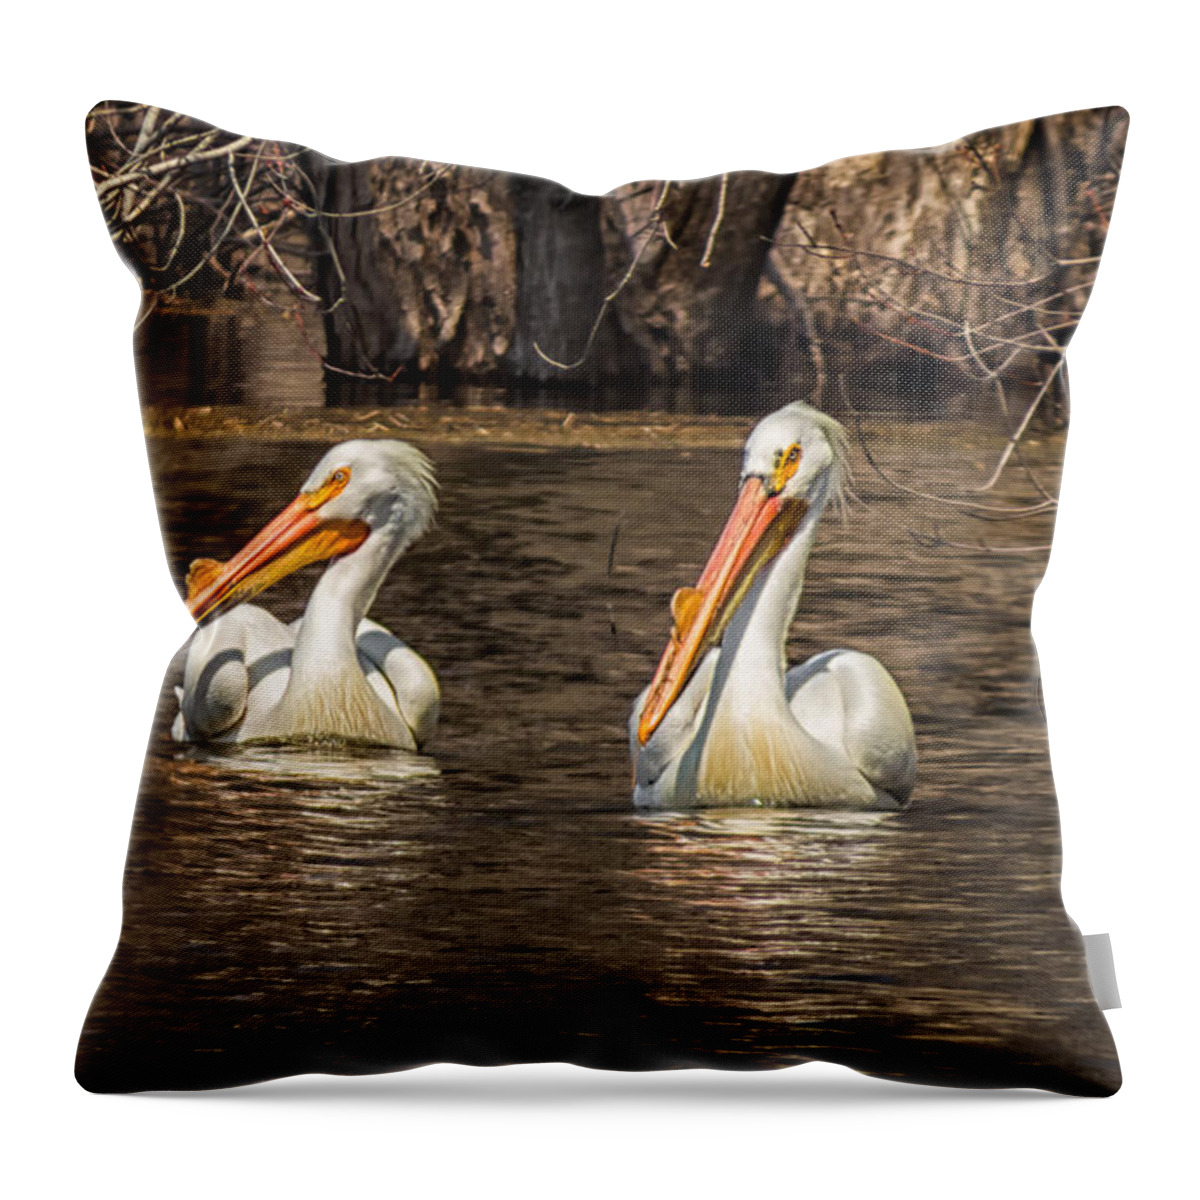 Pelican Bird River Lake Water Pond Reflection Feather Beak Bill Fish Plume Texture Color Orange Yellow Green Blue White Black Ripples Fowl Waterfowl Decorate Spring Summer Open Wall Hand Real Estate Sell Stage Staging Living Room Cabin Outdoor Wildlife Branches Brown Wet Eyes Great River Road Throw Pillow featuring the photograph Pelicans by Tom Gort